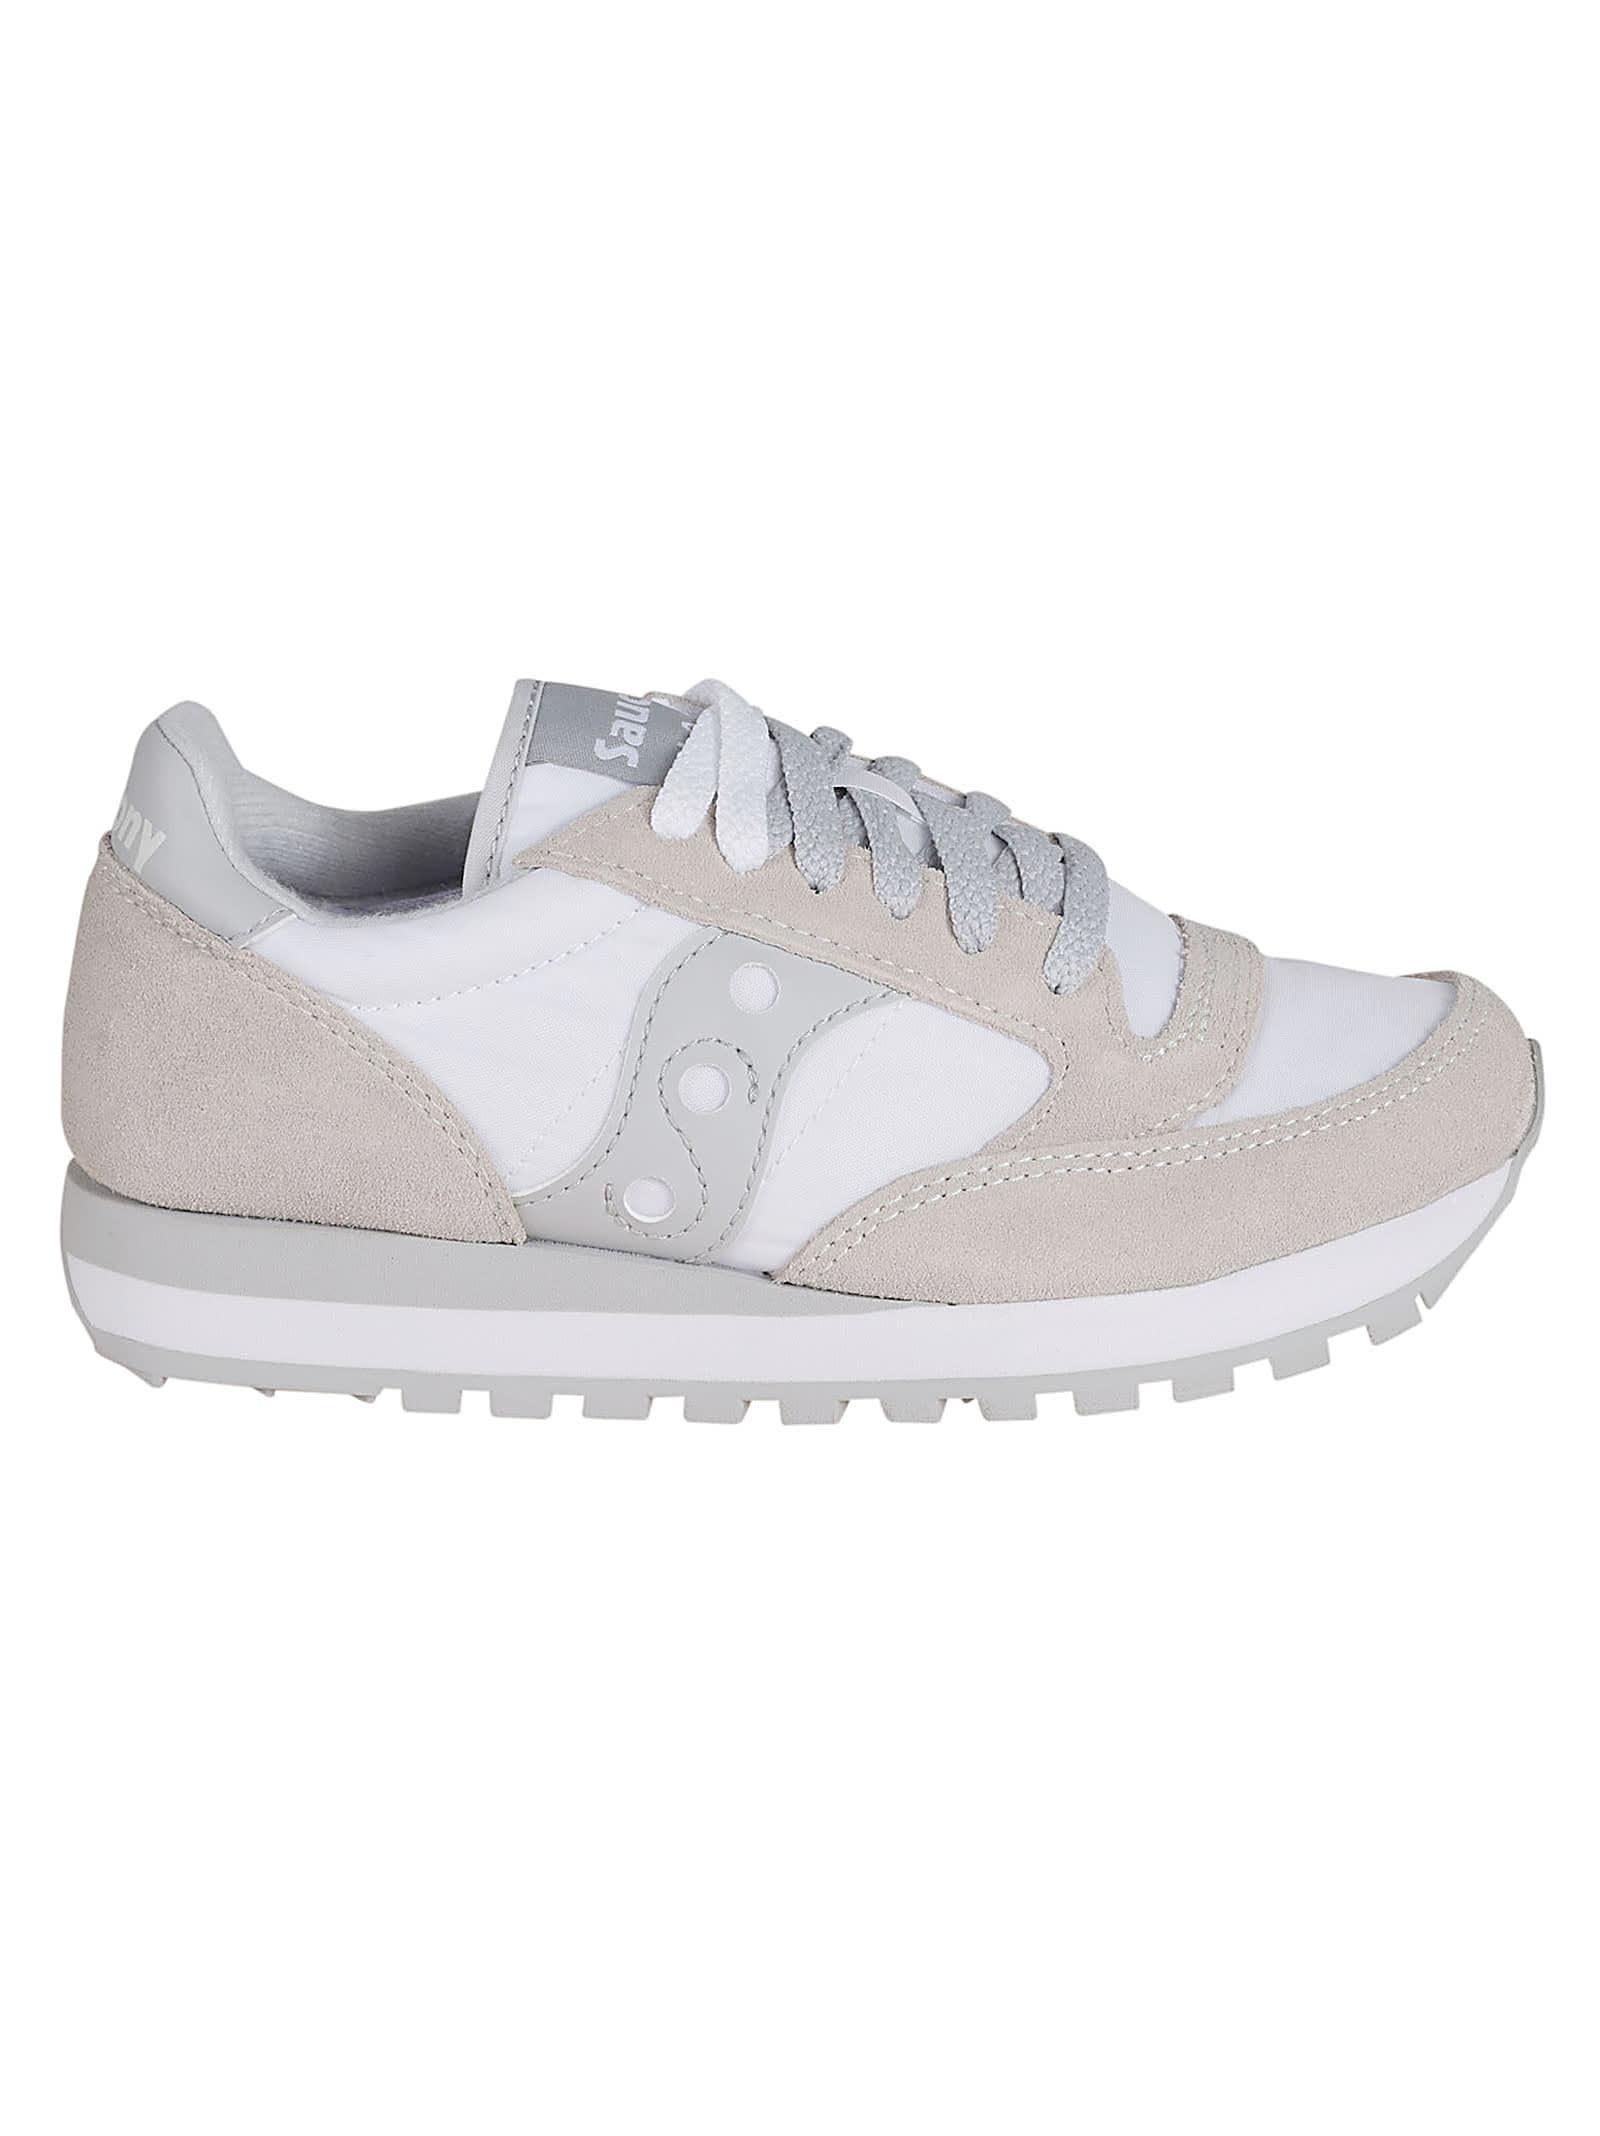 Saucony Shadow Original Sneakers in White | Lyst